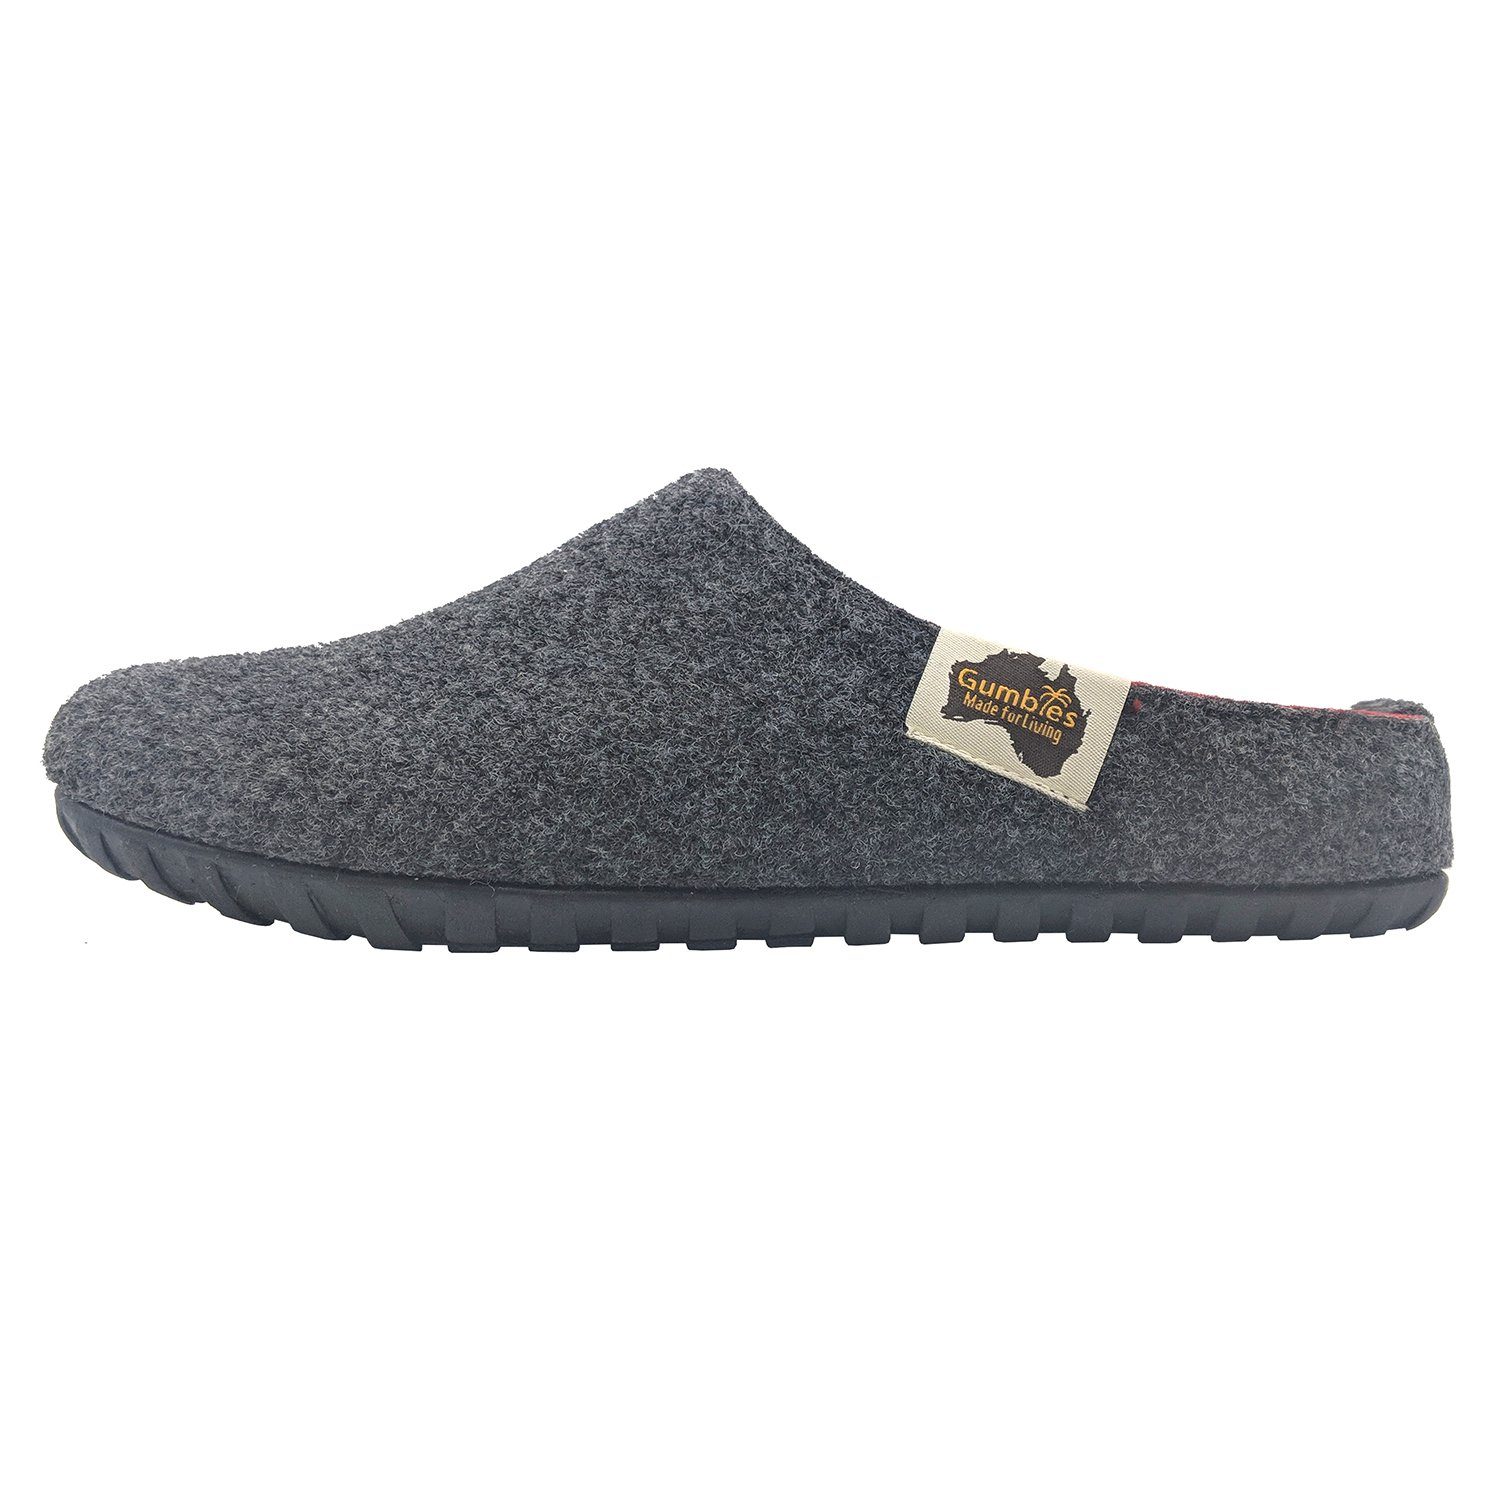 »in Charcoal Outback recycelten Designs« farbenfrohen Slipper Materialien in Gumbies charcoal-Red Hausschuh Red aus